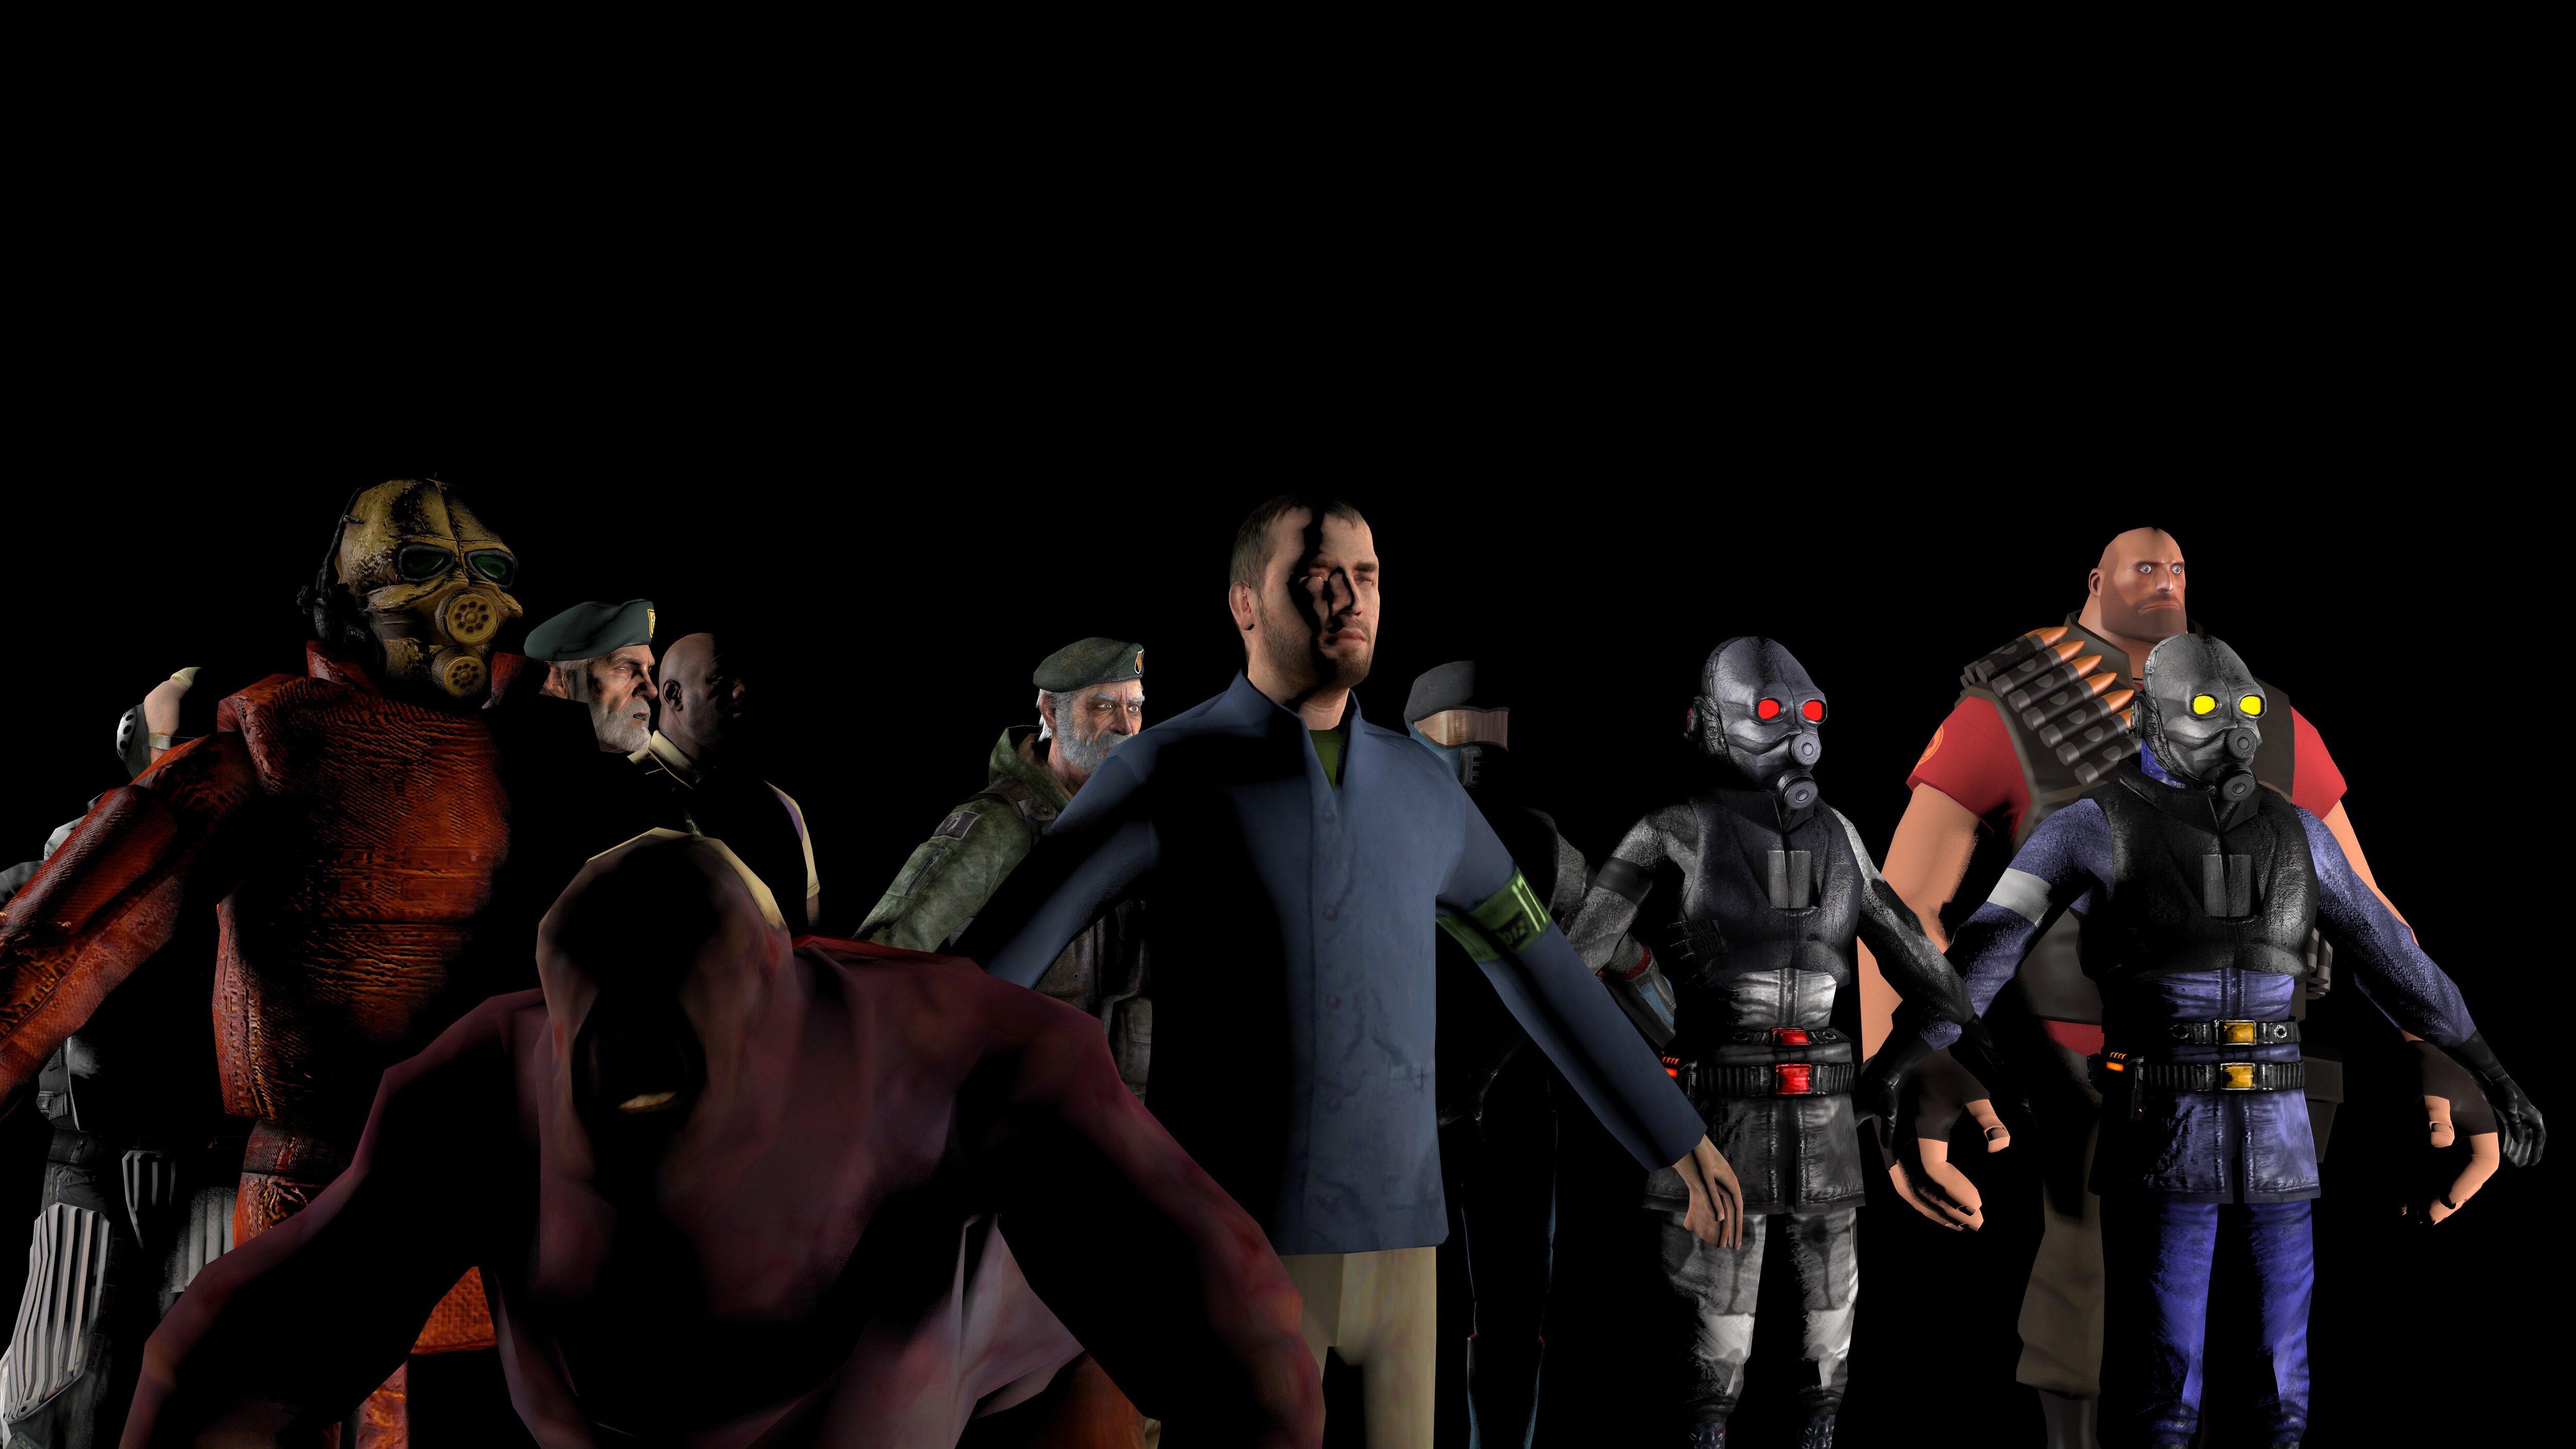 Nemesis Challenges Mr. X To A Fight (Poster Made By Me In SFM